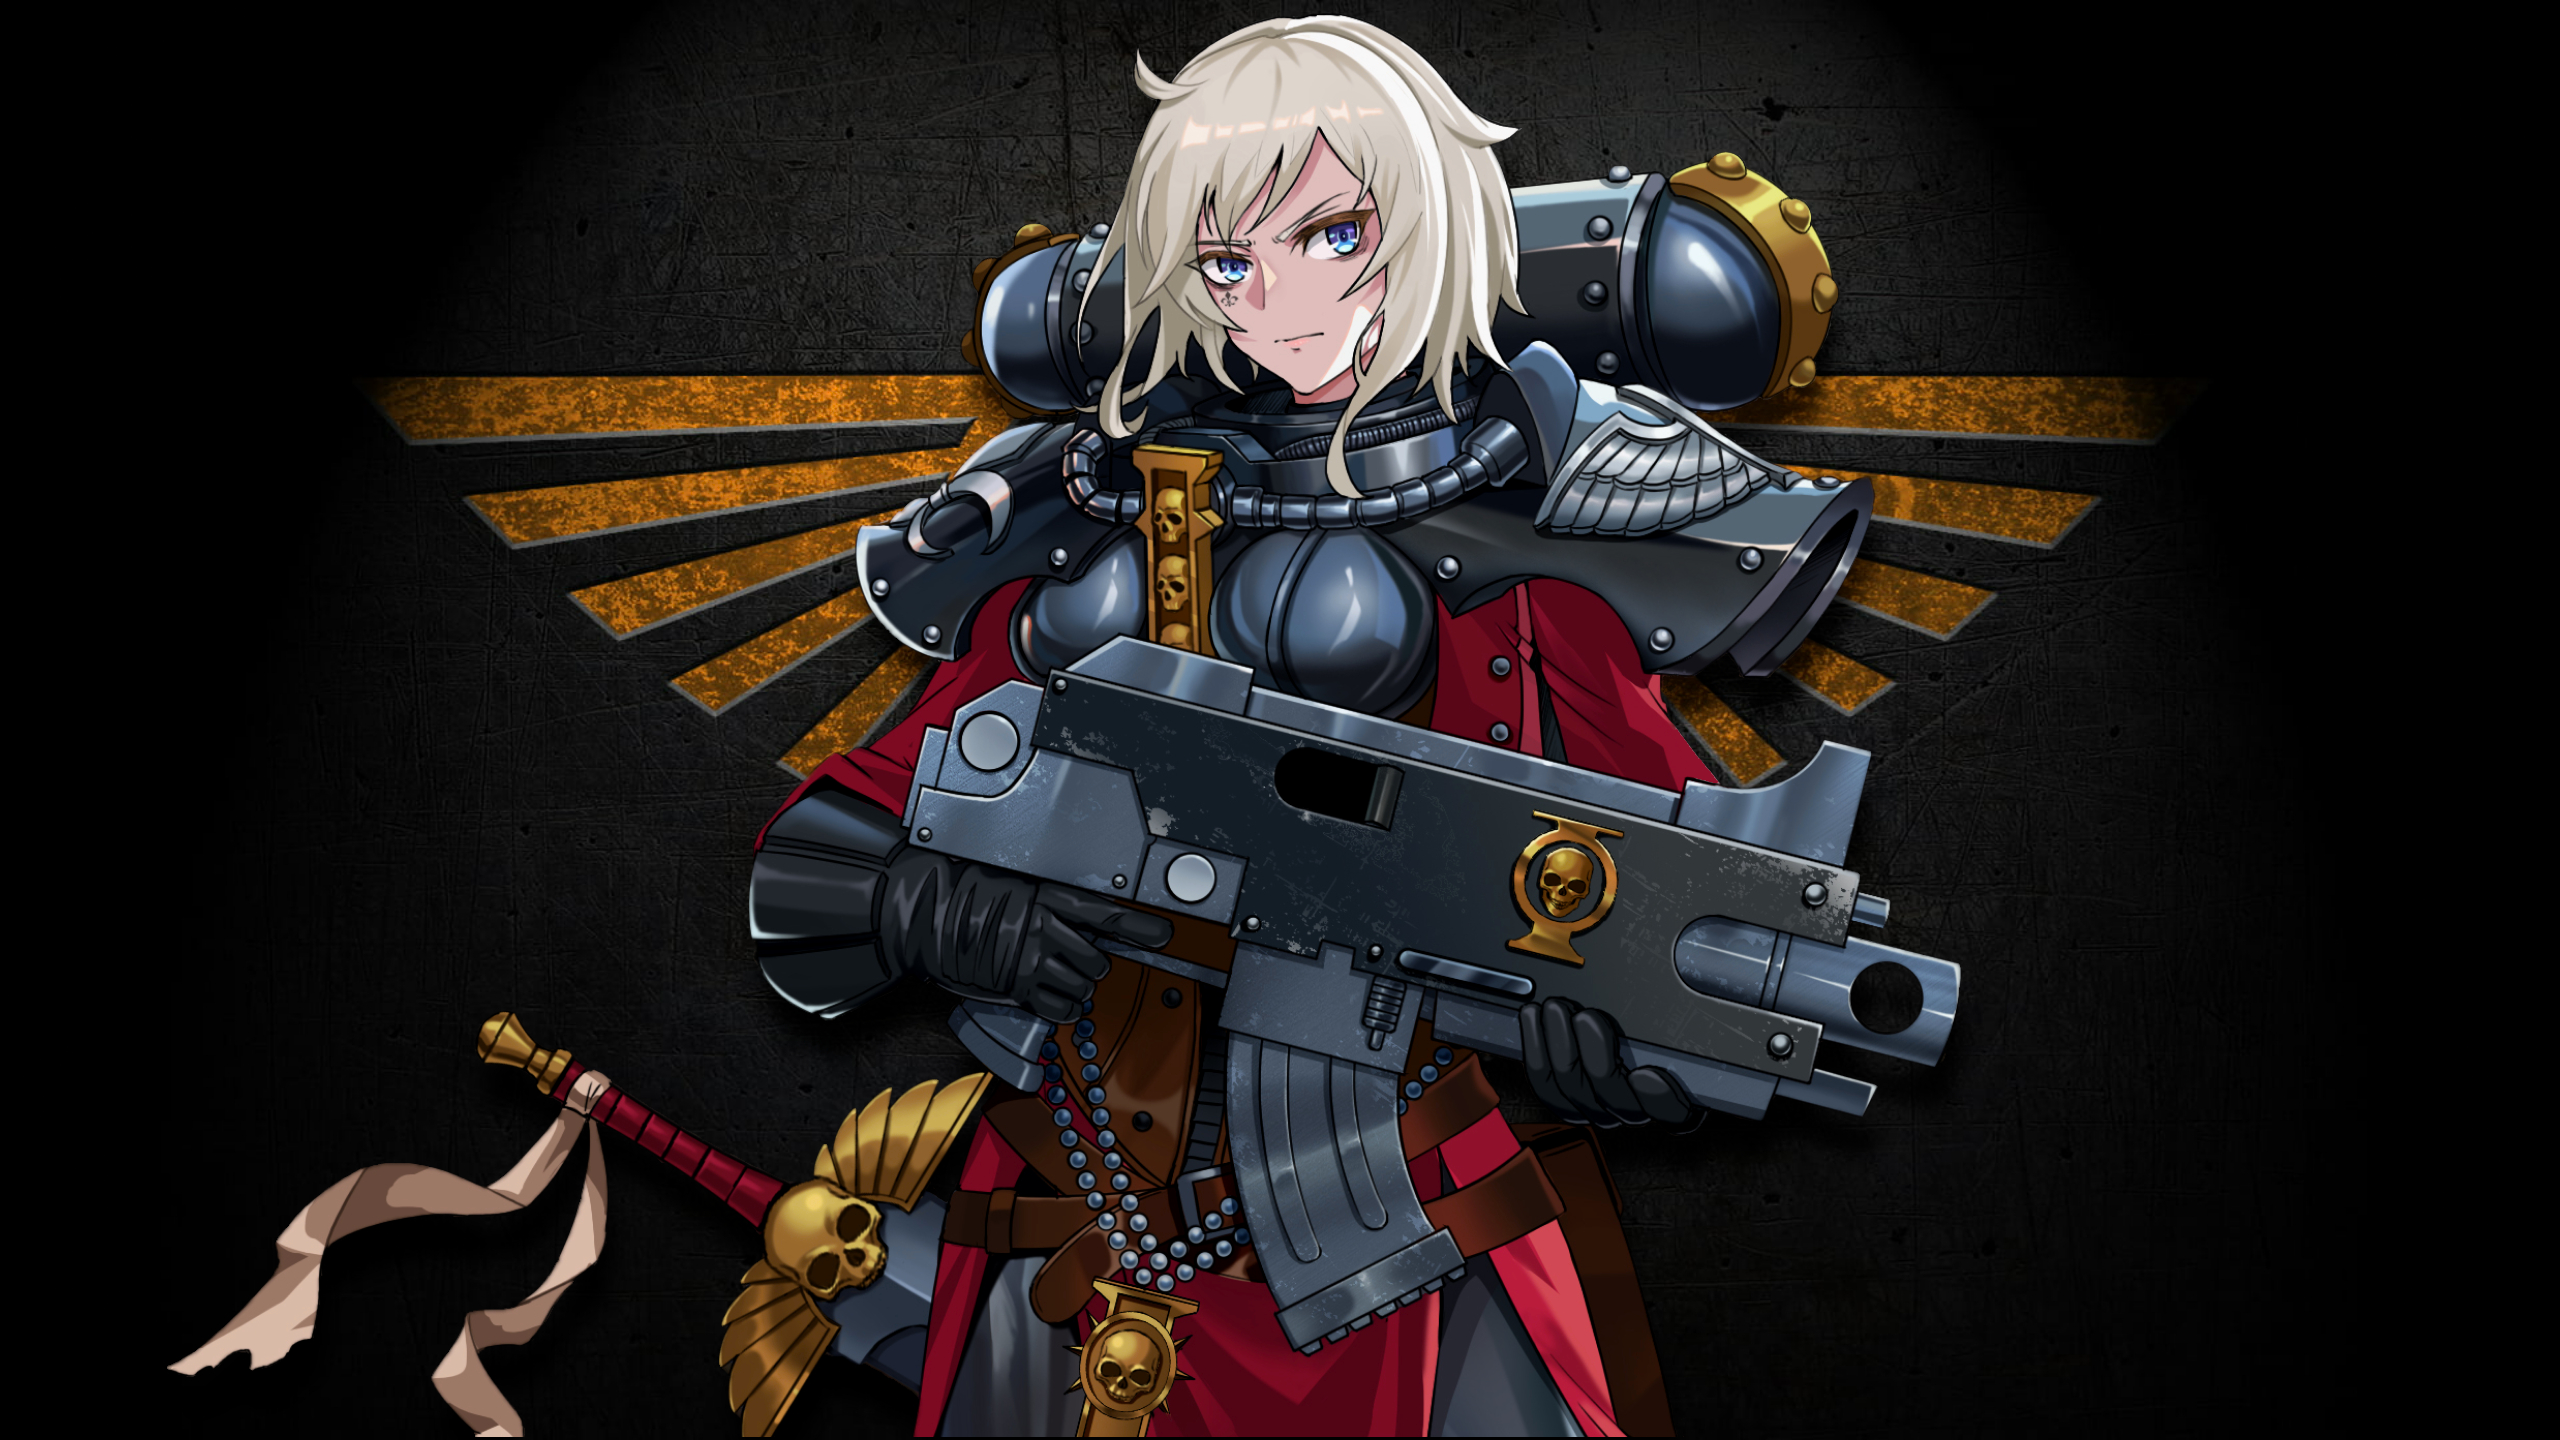 Anime 2560x1440 Warhammer 40,000 Warhammer science fiction technology gun bolter sister of battle Sisters of Battle white hair blue eyes wings red silver gold skull simple background armor minimalism sword weapon